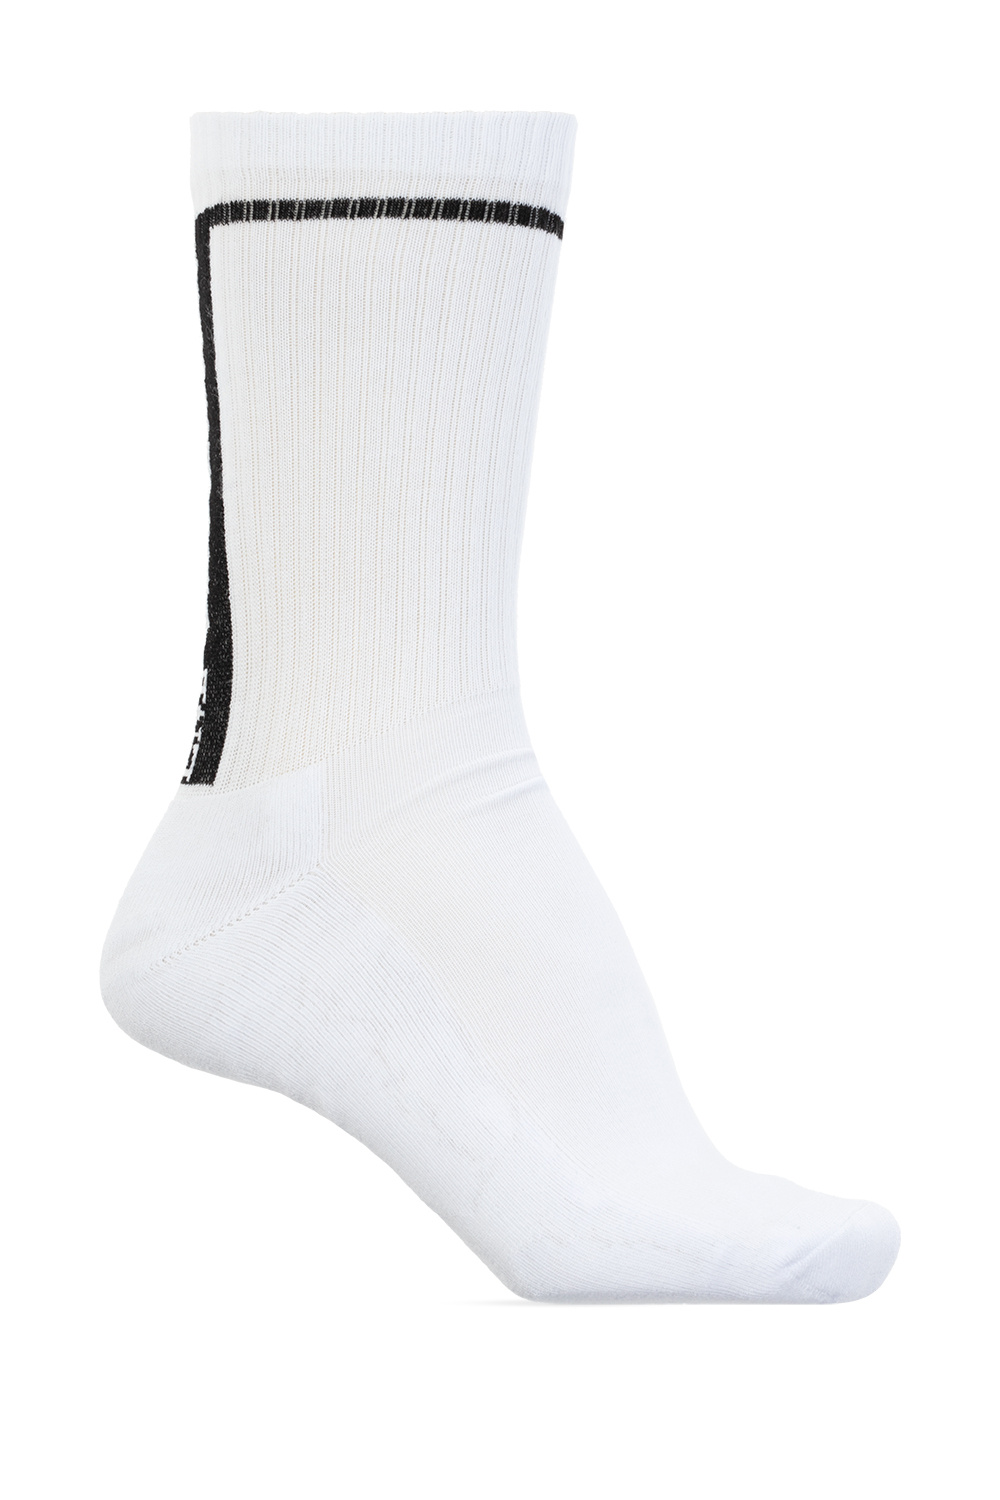 Emporio armani polo Branded socks two-pack